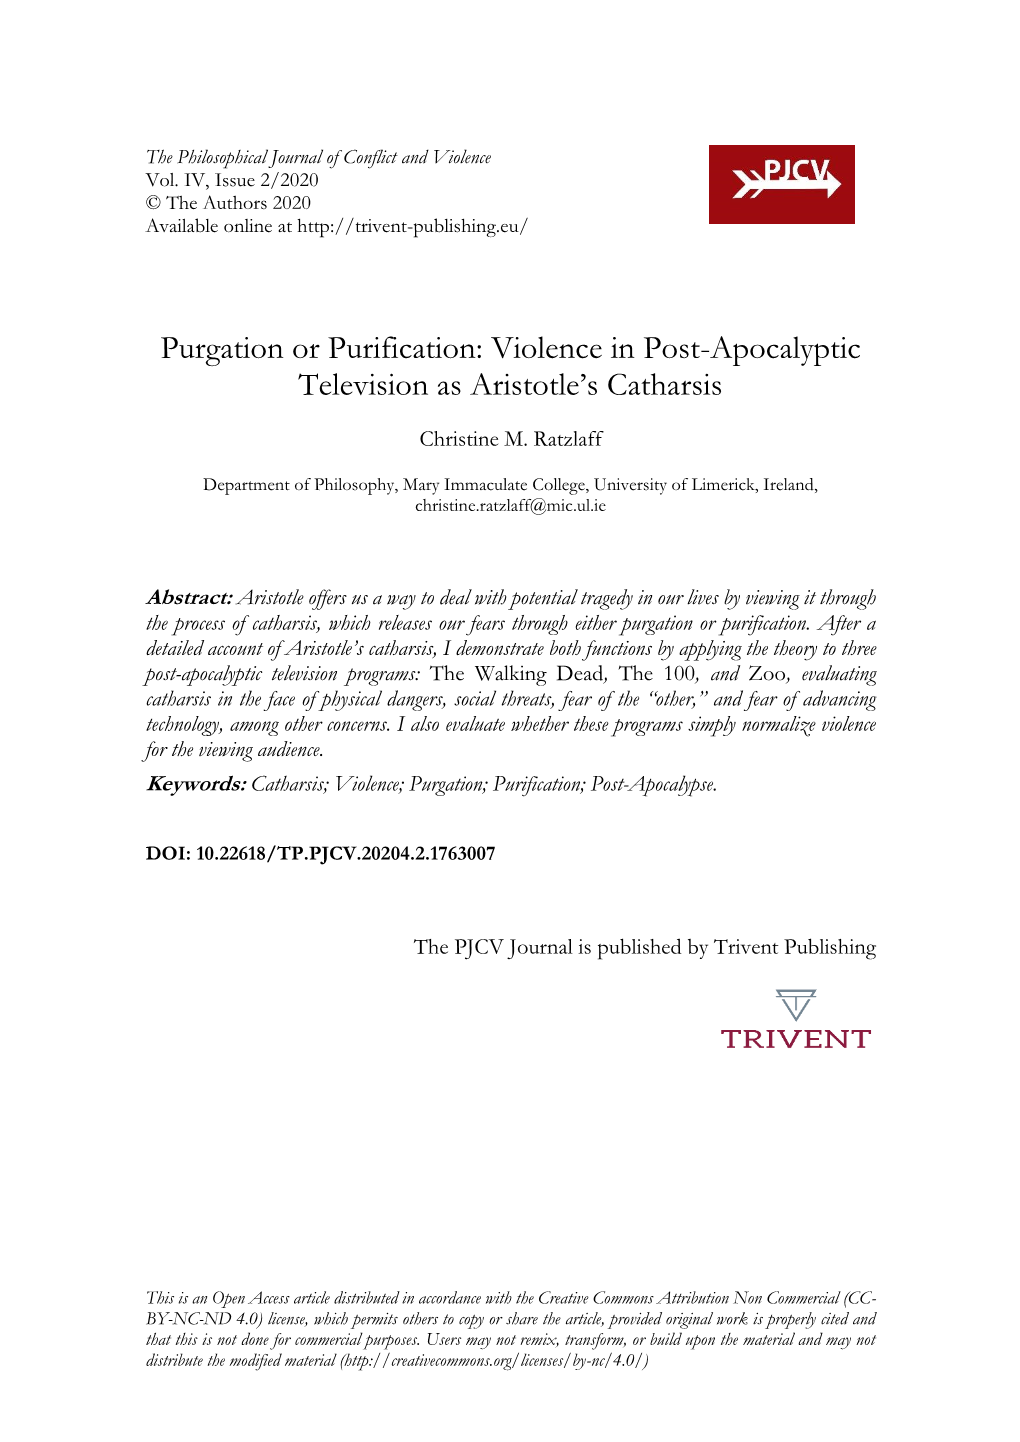 Violence in Post-Apocalyptic Television As Aristotle's Catharsis